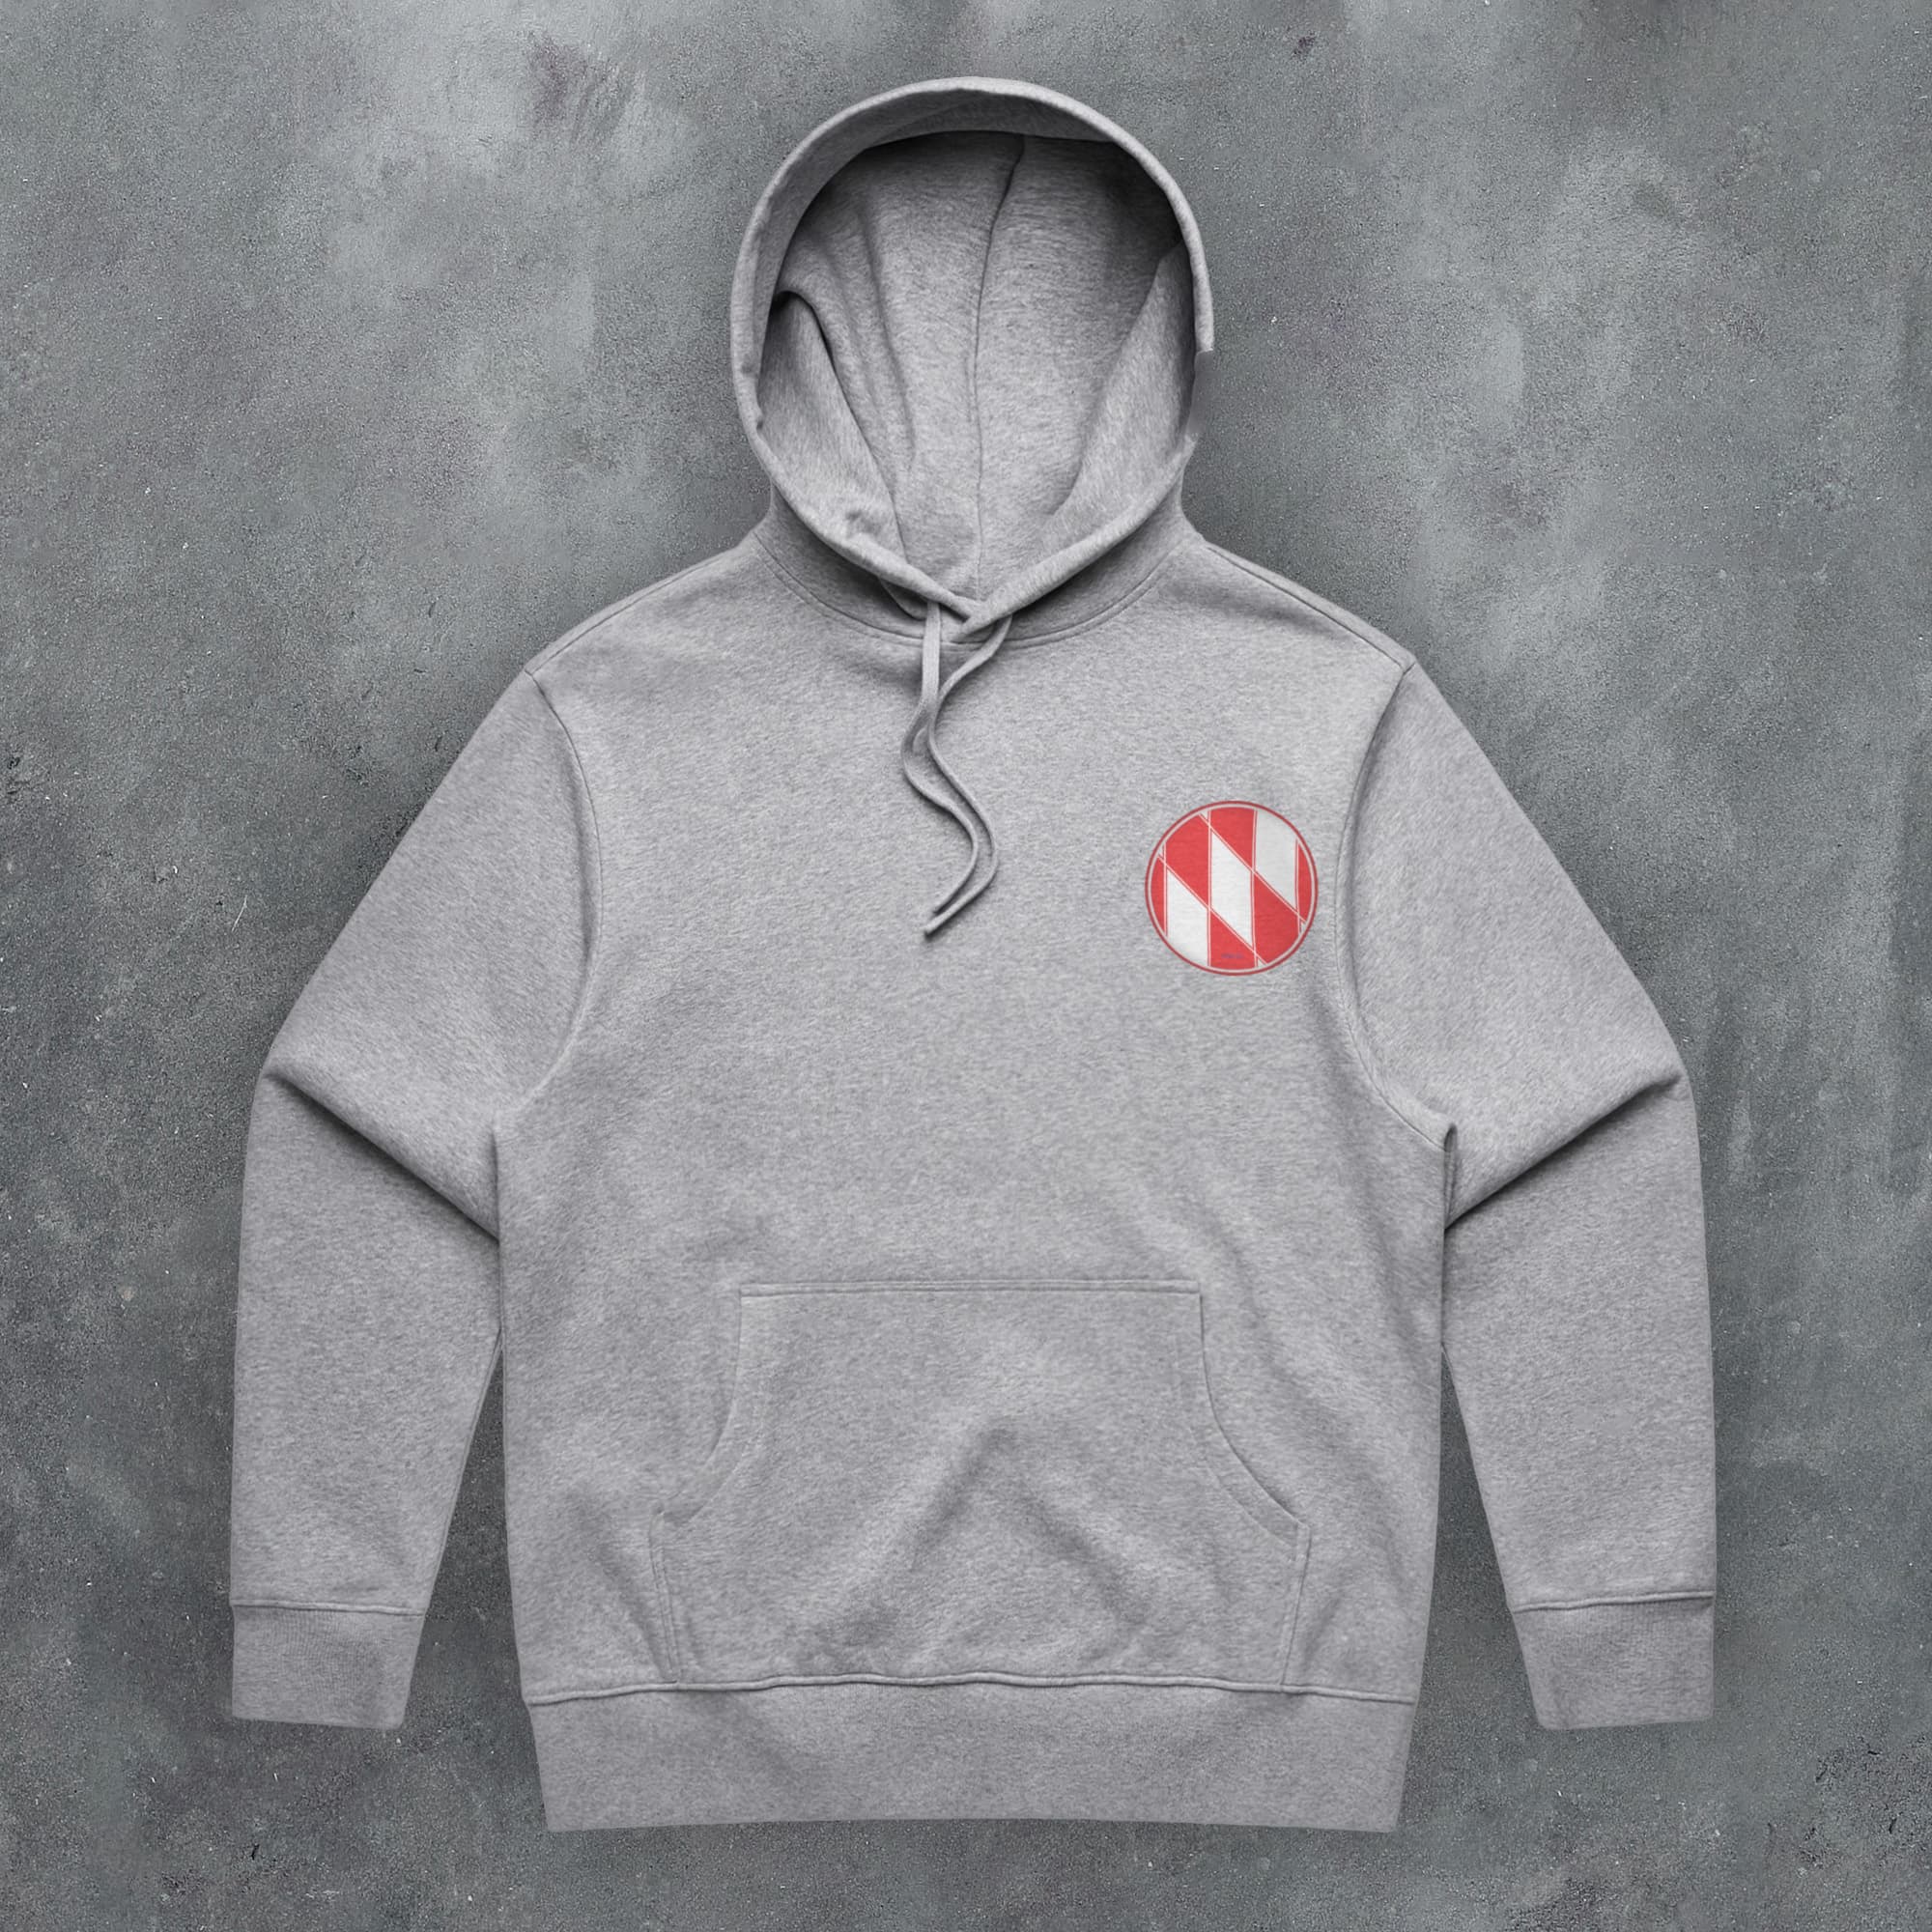 a grey hoodie with a red and white checkered button on it